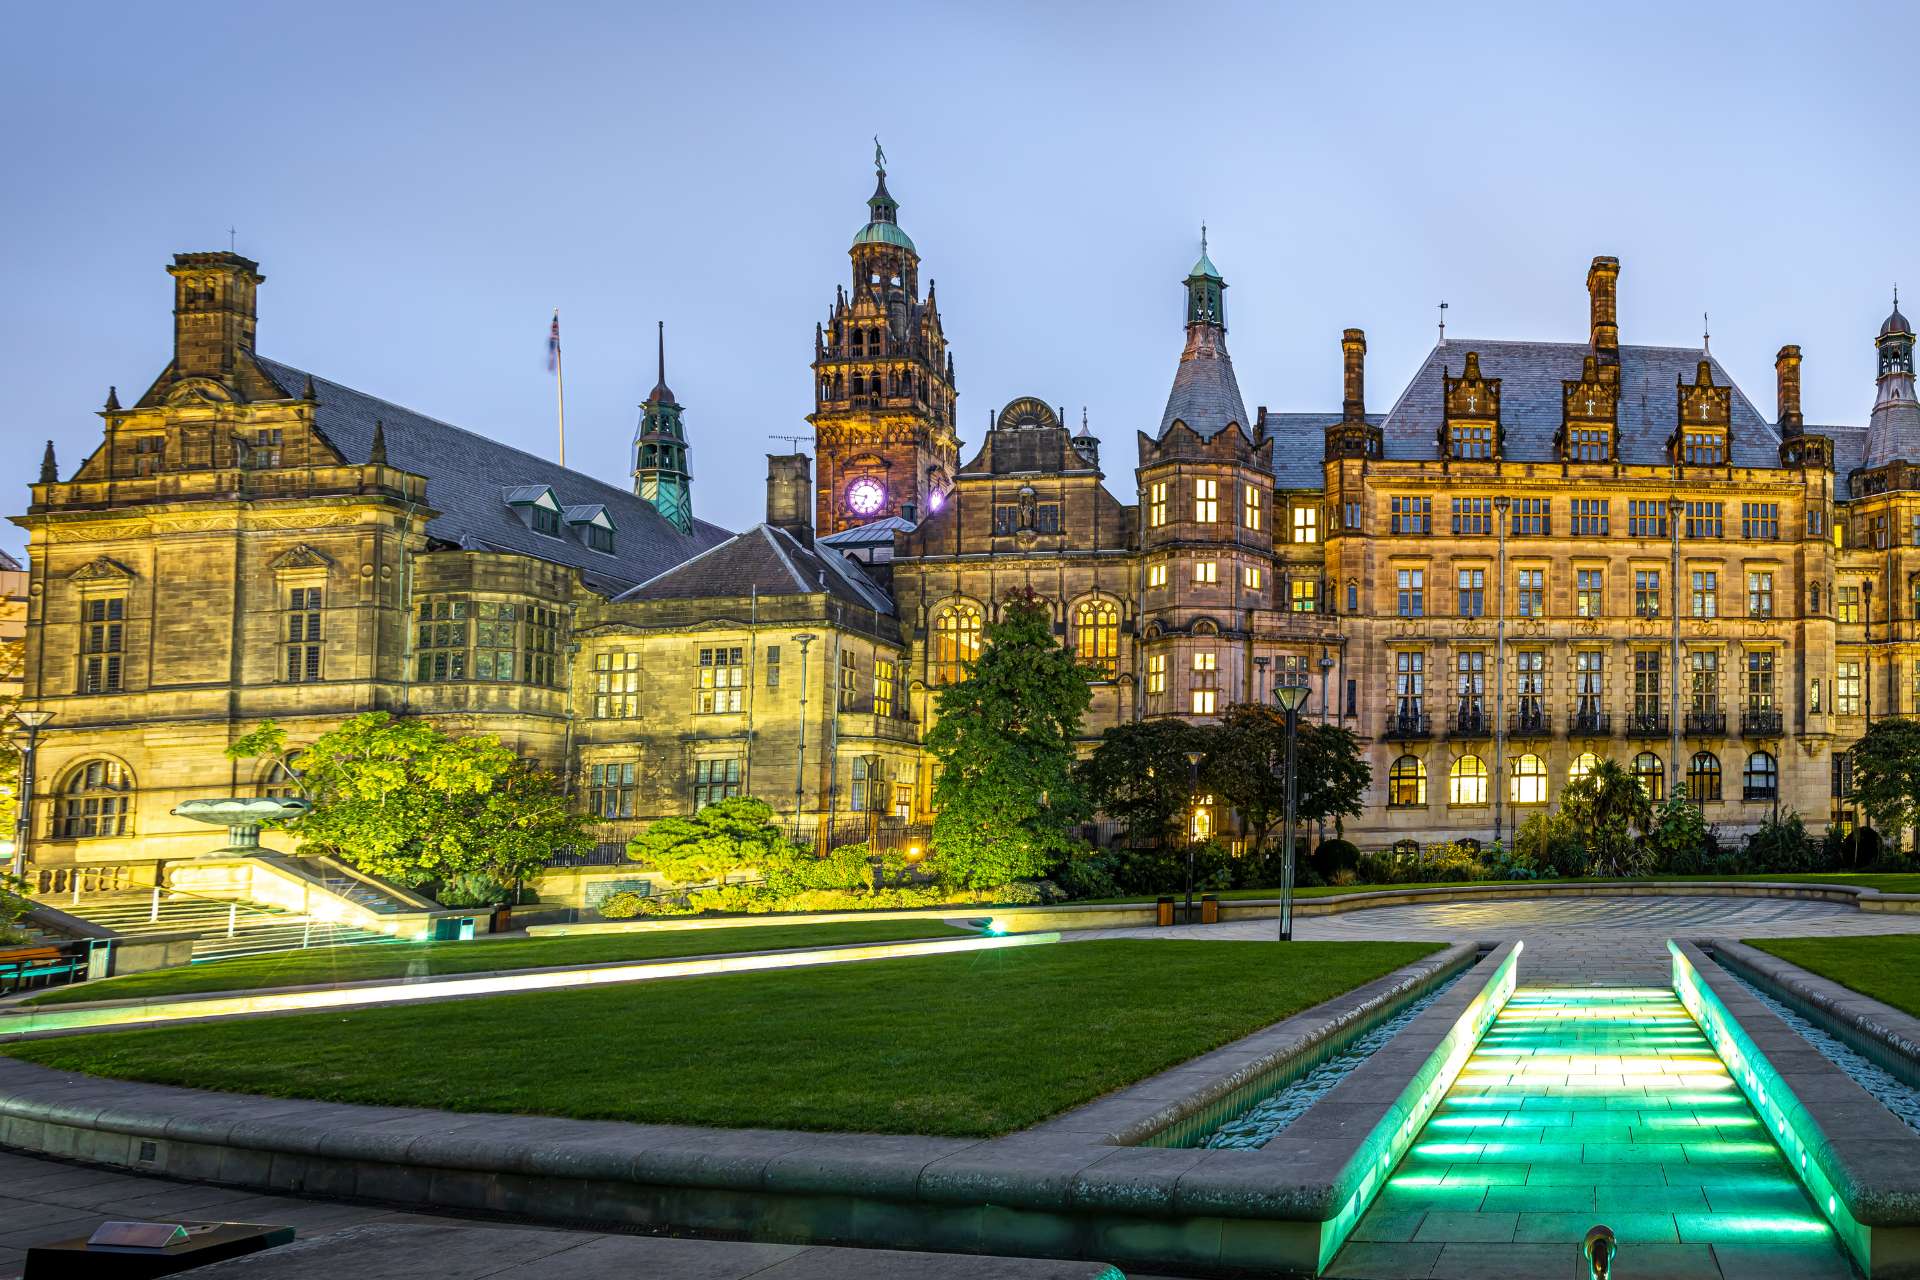 Sheffield City Council and Town Hall lit up at night